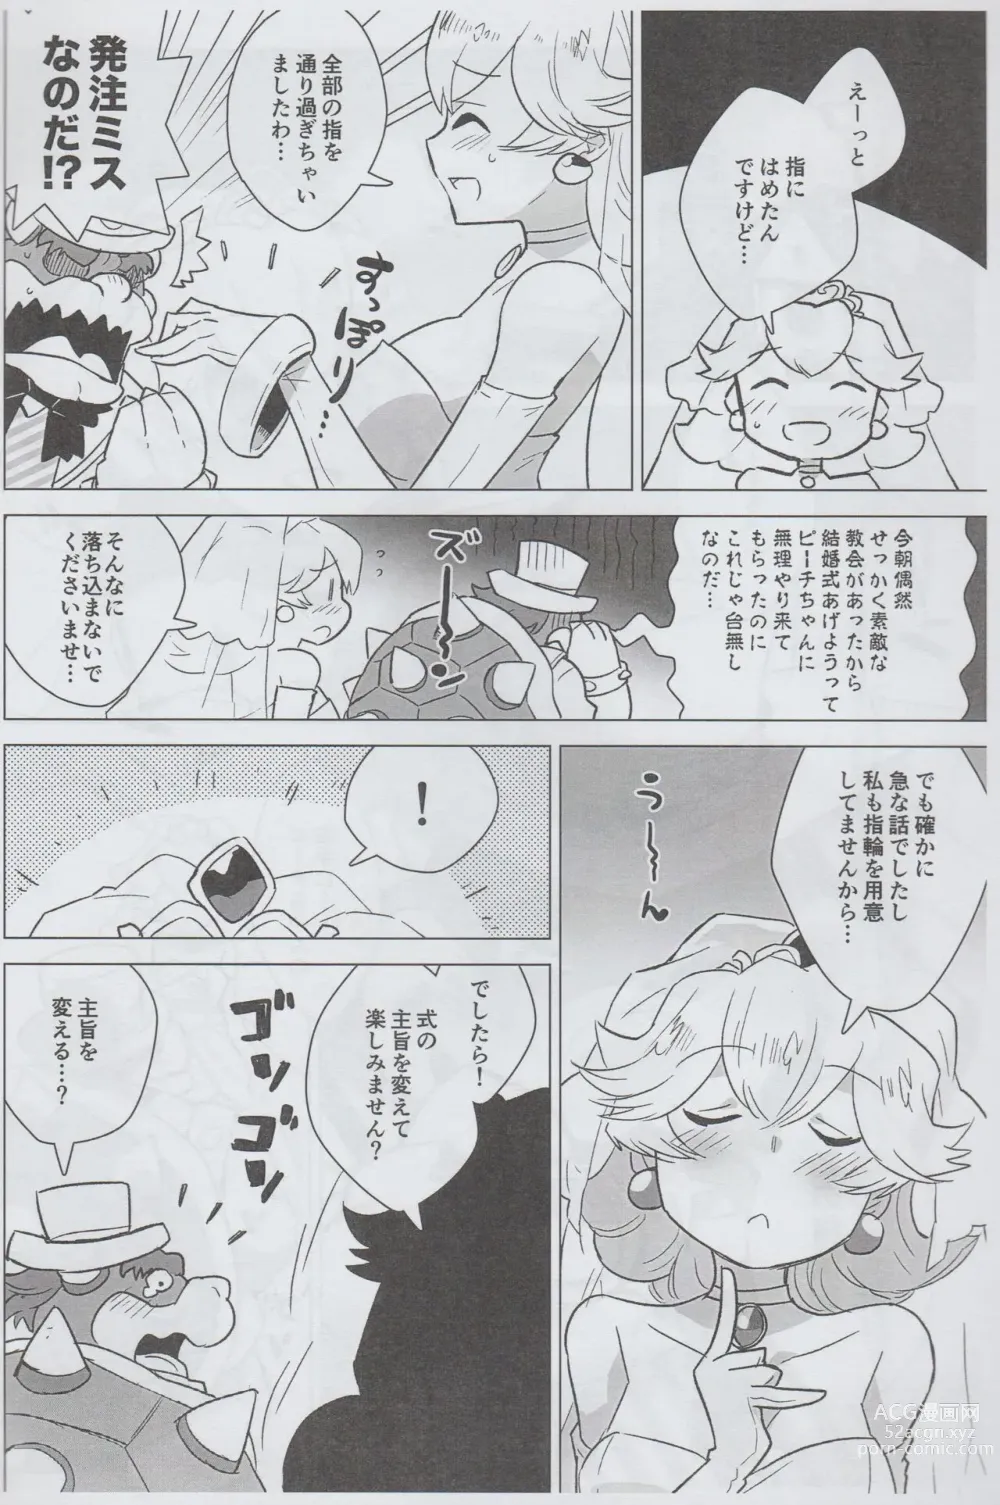 Page 3 of doujinshi Engage Link